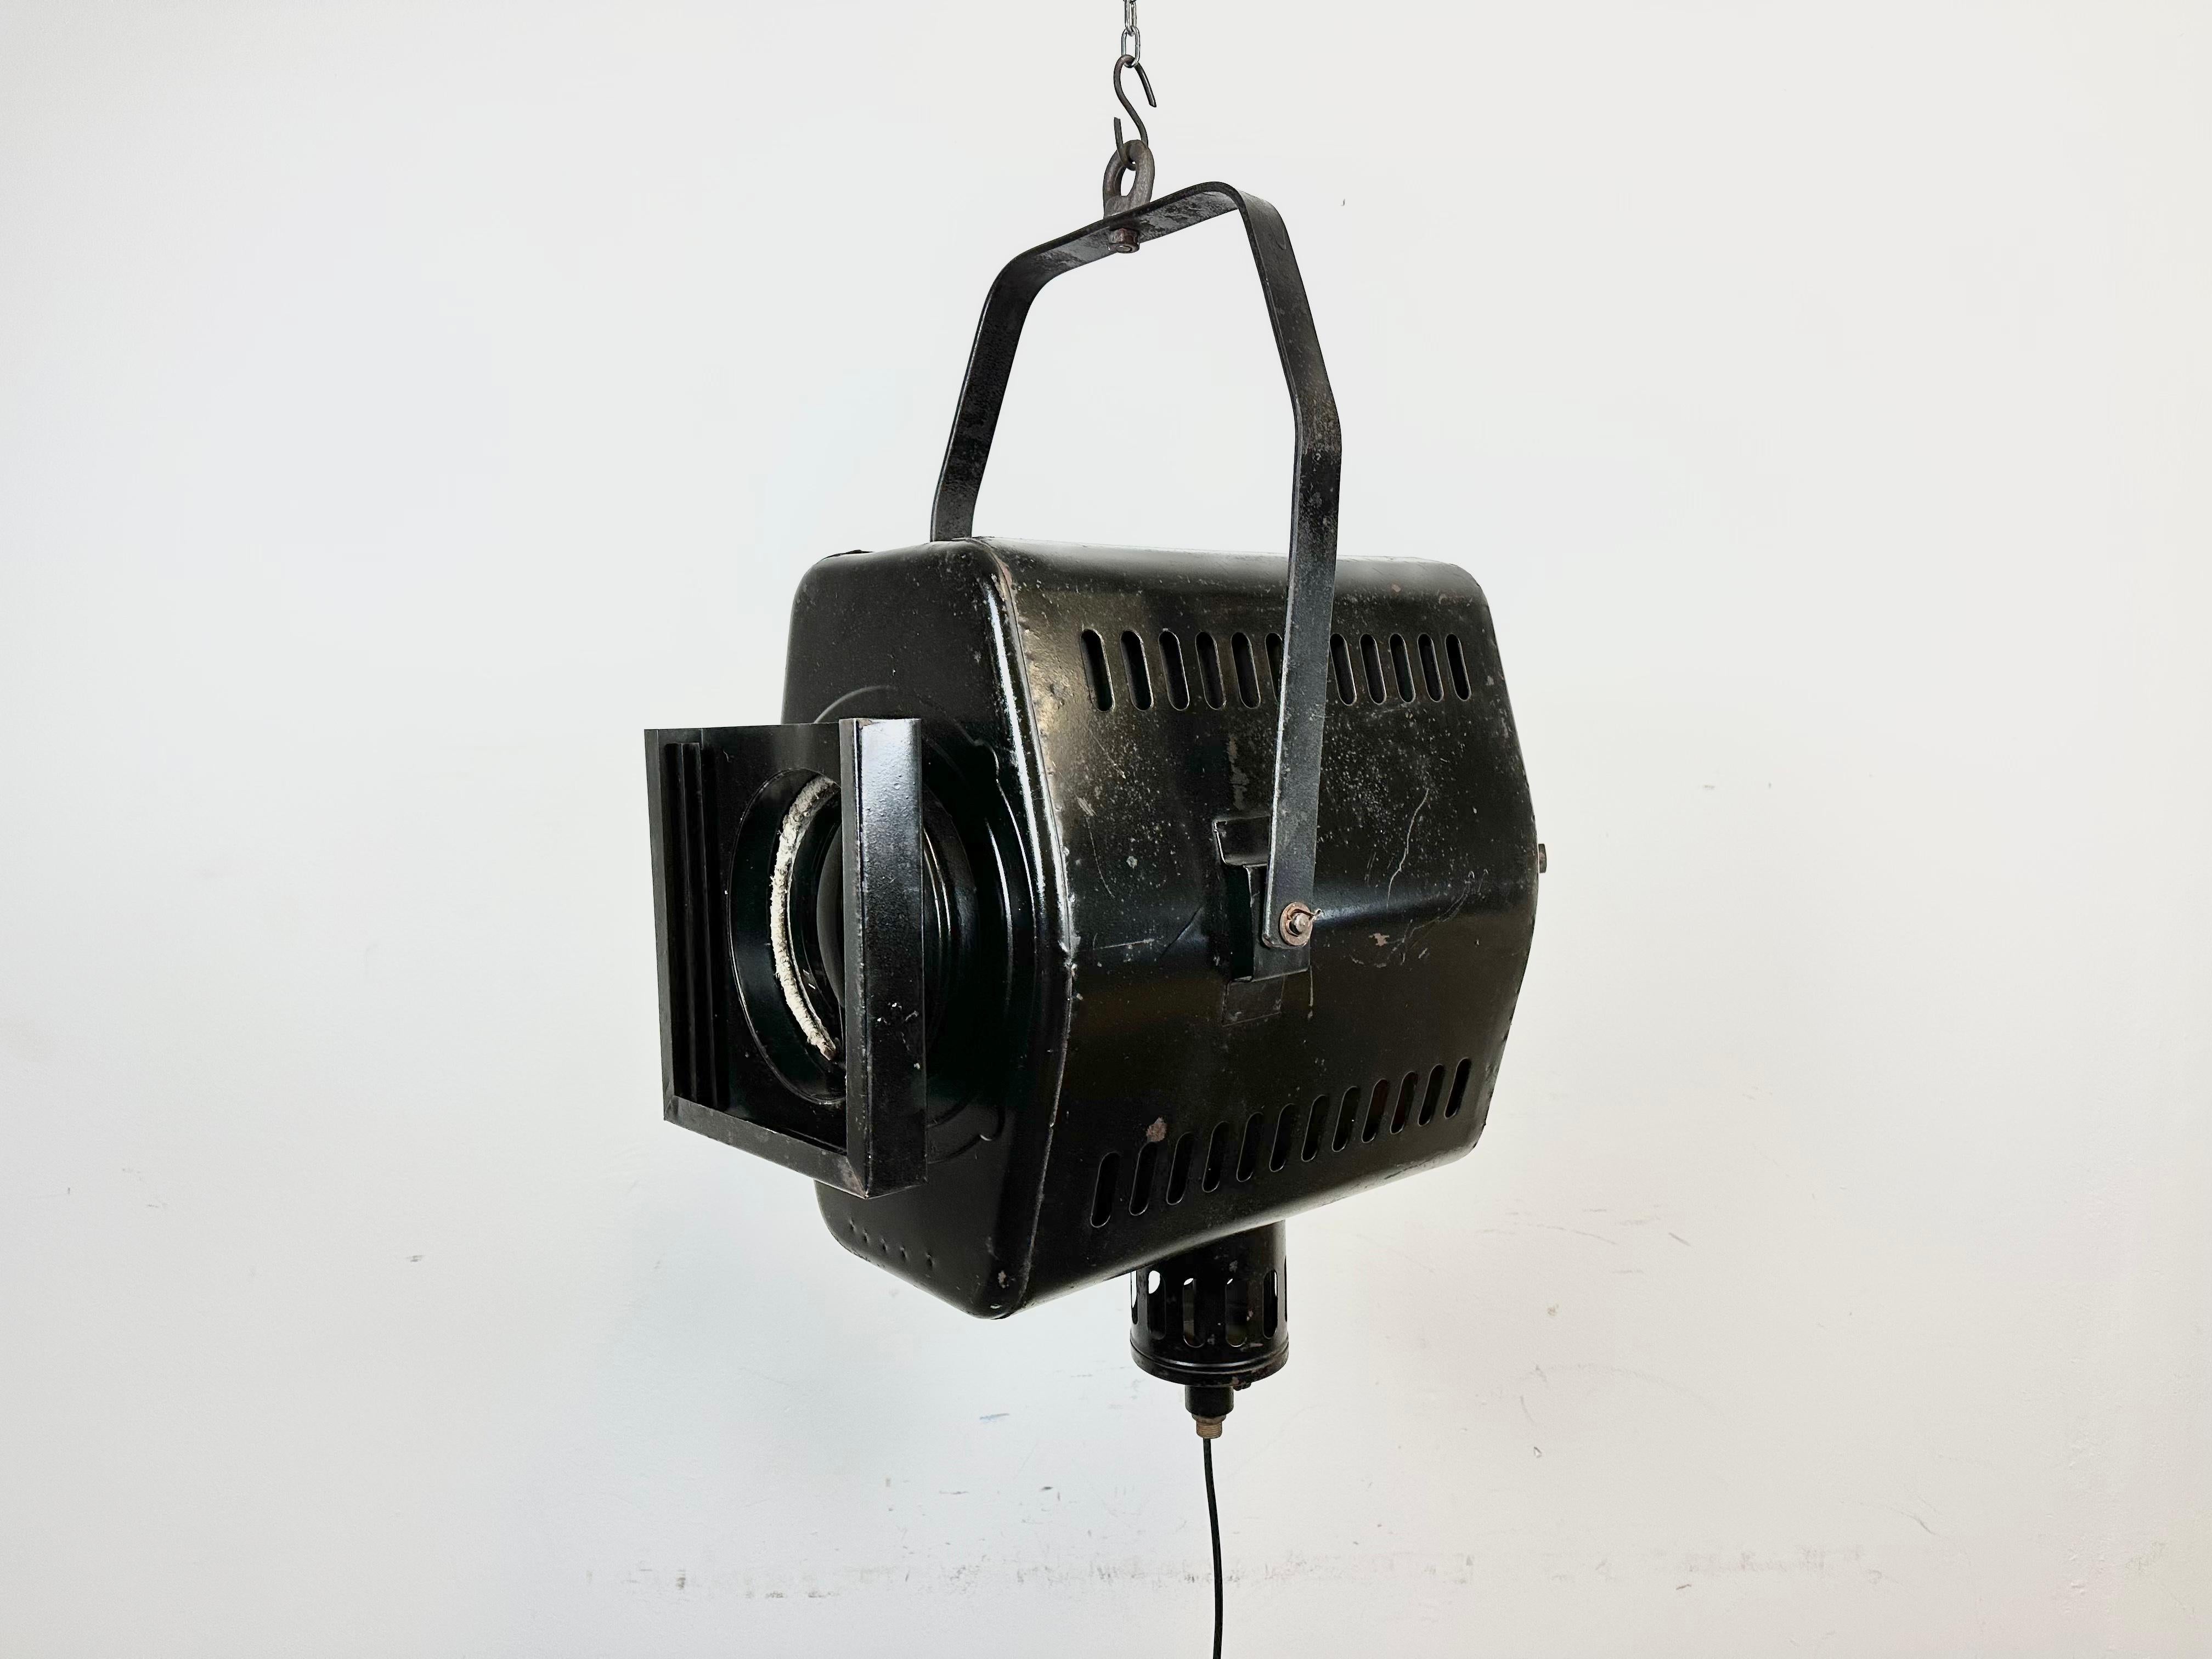 - Vintage theatre spotlight made in former Czechoslovakia during the 1950s 
- It features a black metal body and clear glass lens cover
- The porcelain socket requires E27/ E26 lightbulbs 
- New wire
-The height of the spotlight is 50 cm. With